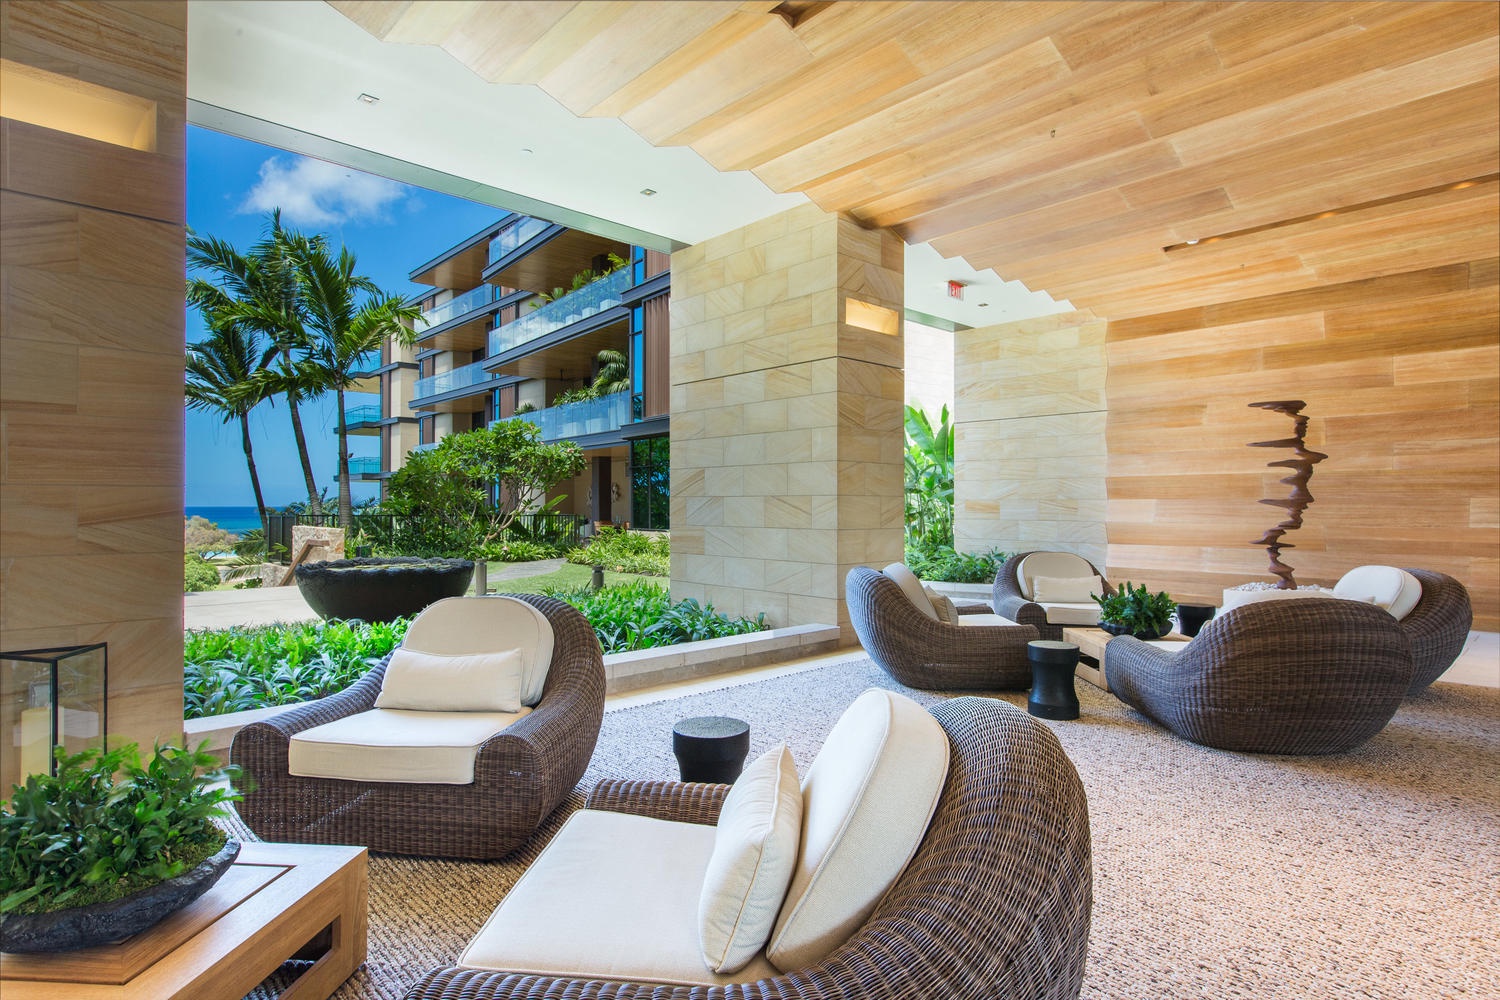 Honolulu Vacation Rentals, Park Lane Sky Resort - The grand open-air lobby offers a space to plan your day on the island